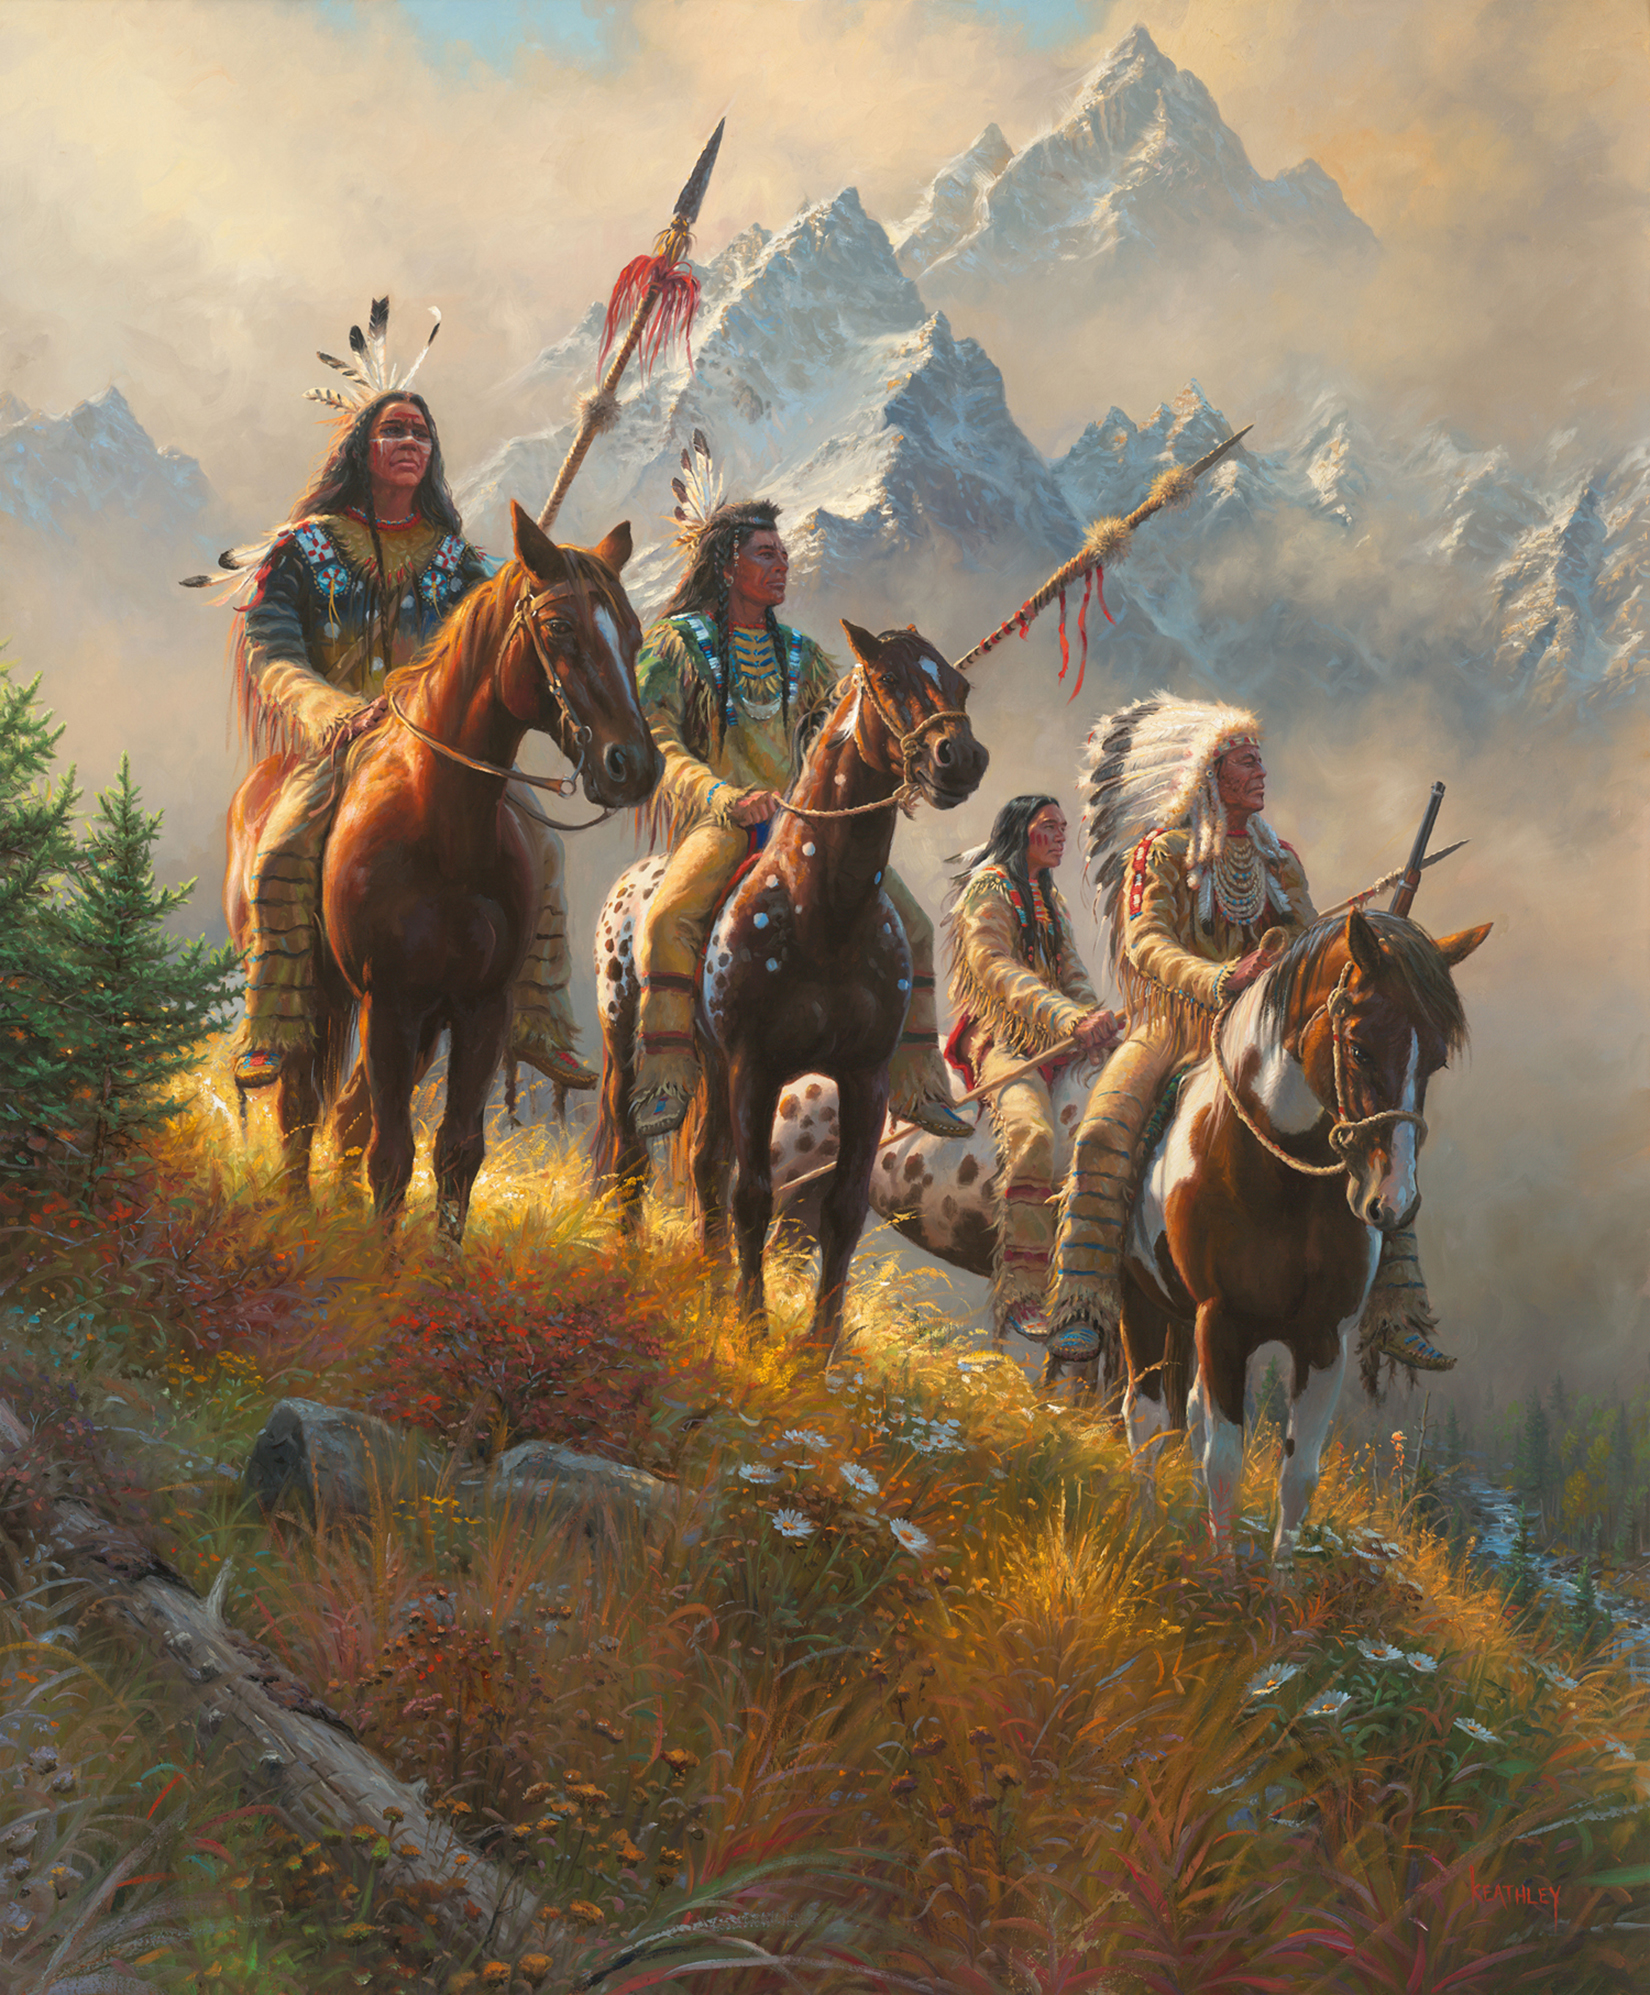 The atmospheric oil painting “Rise Above” by Mark Keathley is the featured artwork for the 2017 Jackson Hole Fall Arts Festival, set to be sold at auction Sept. 16 on Jackson Town Square.